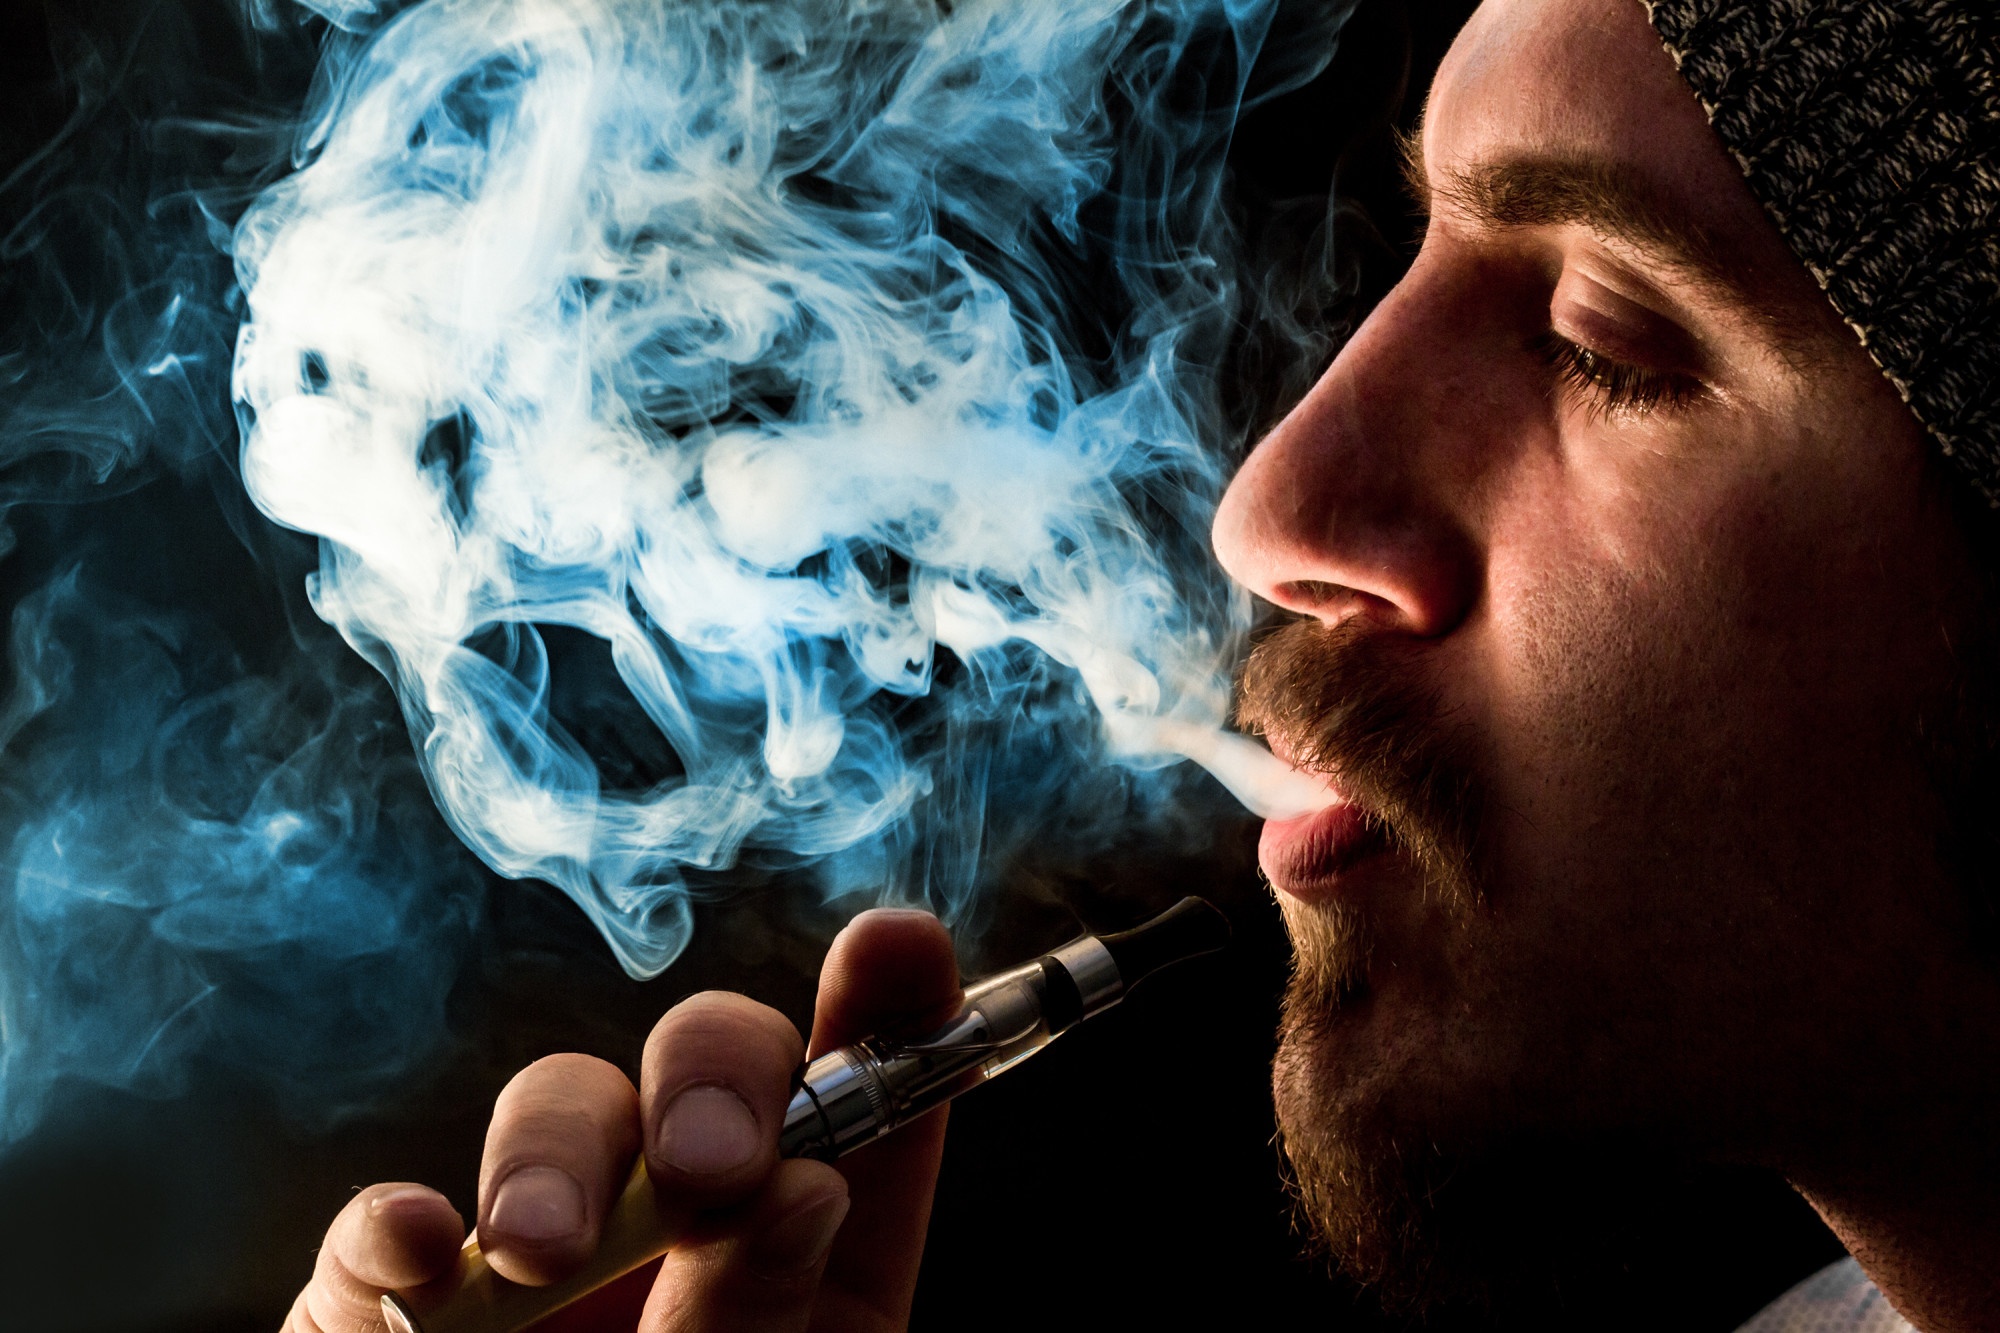 Why Is My Vape Not Working? 5 Ways to Troubleshoot Your Vape